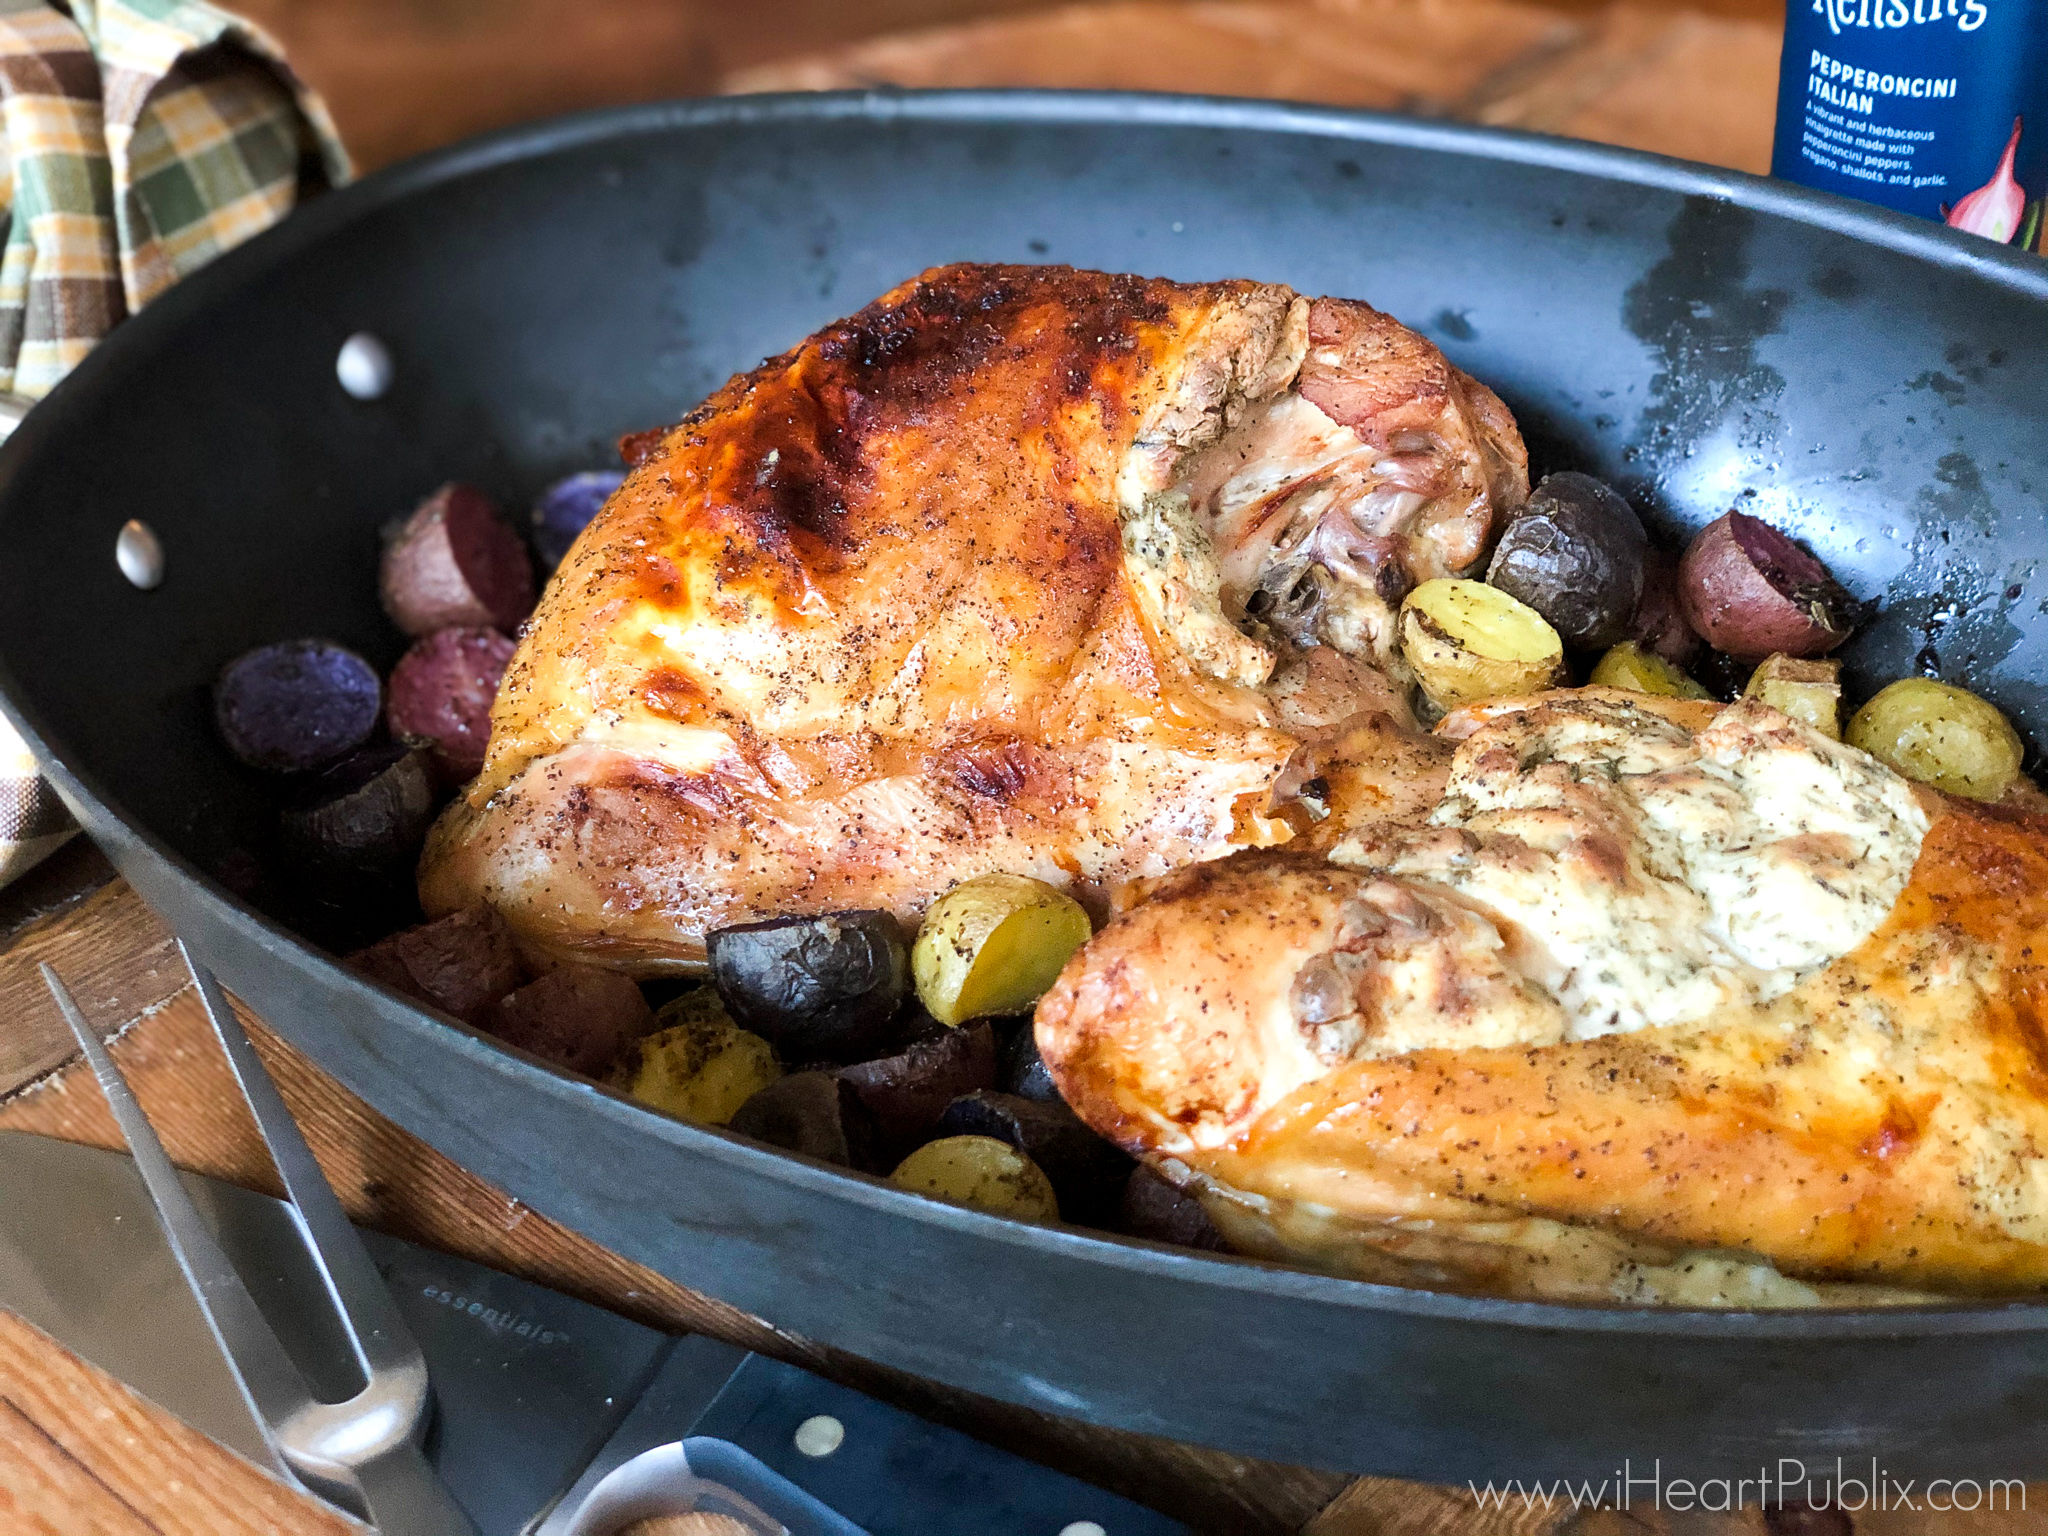 Try This Italian Roasted Cream Cheese Stuffed Turkey Breast With Potatoes - Great Holiday OR Weeknight Meal Your Family Will Love! on I Heart Publix